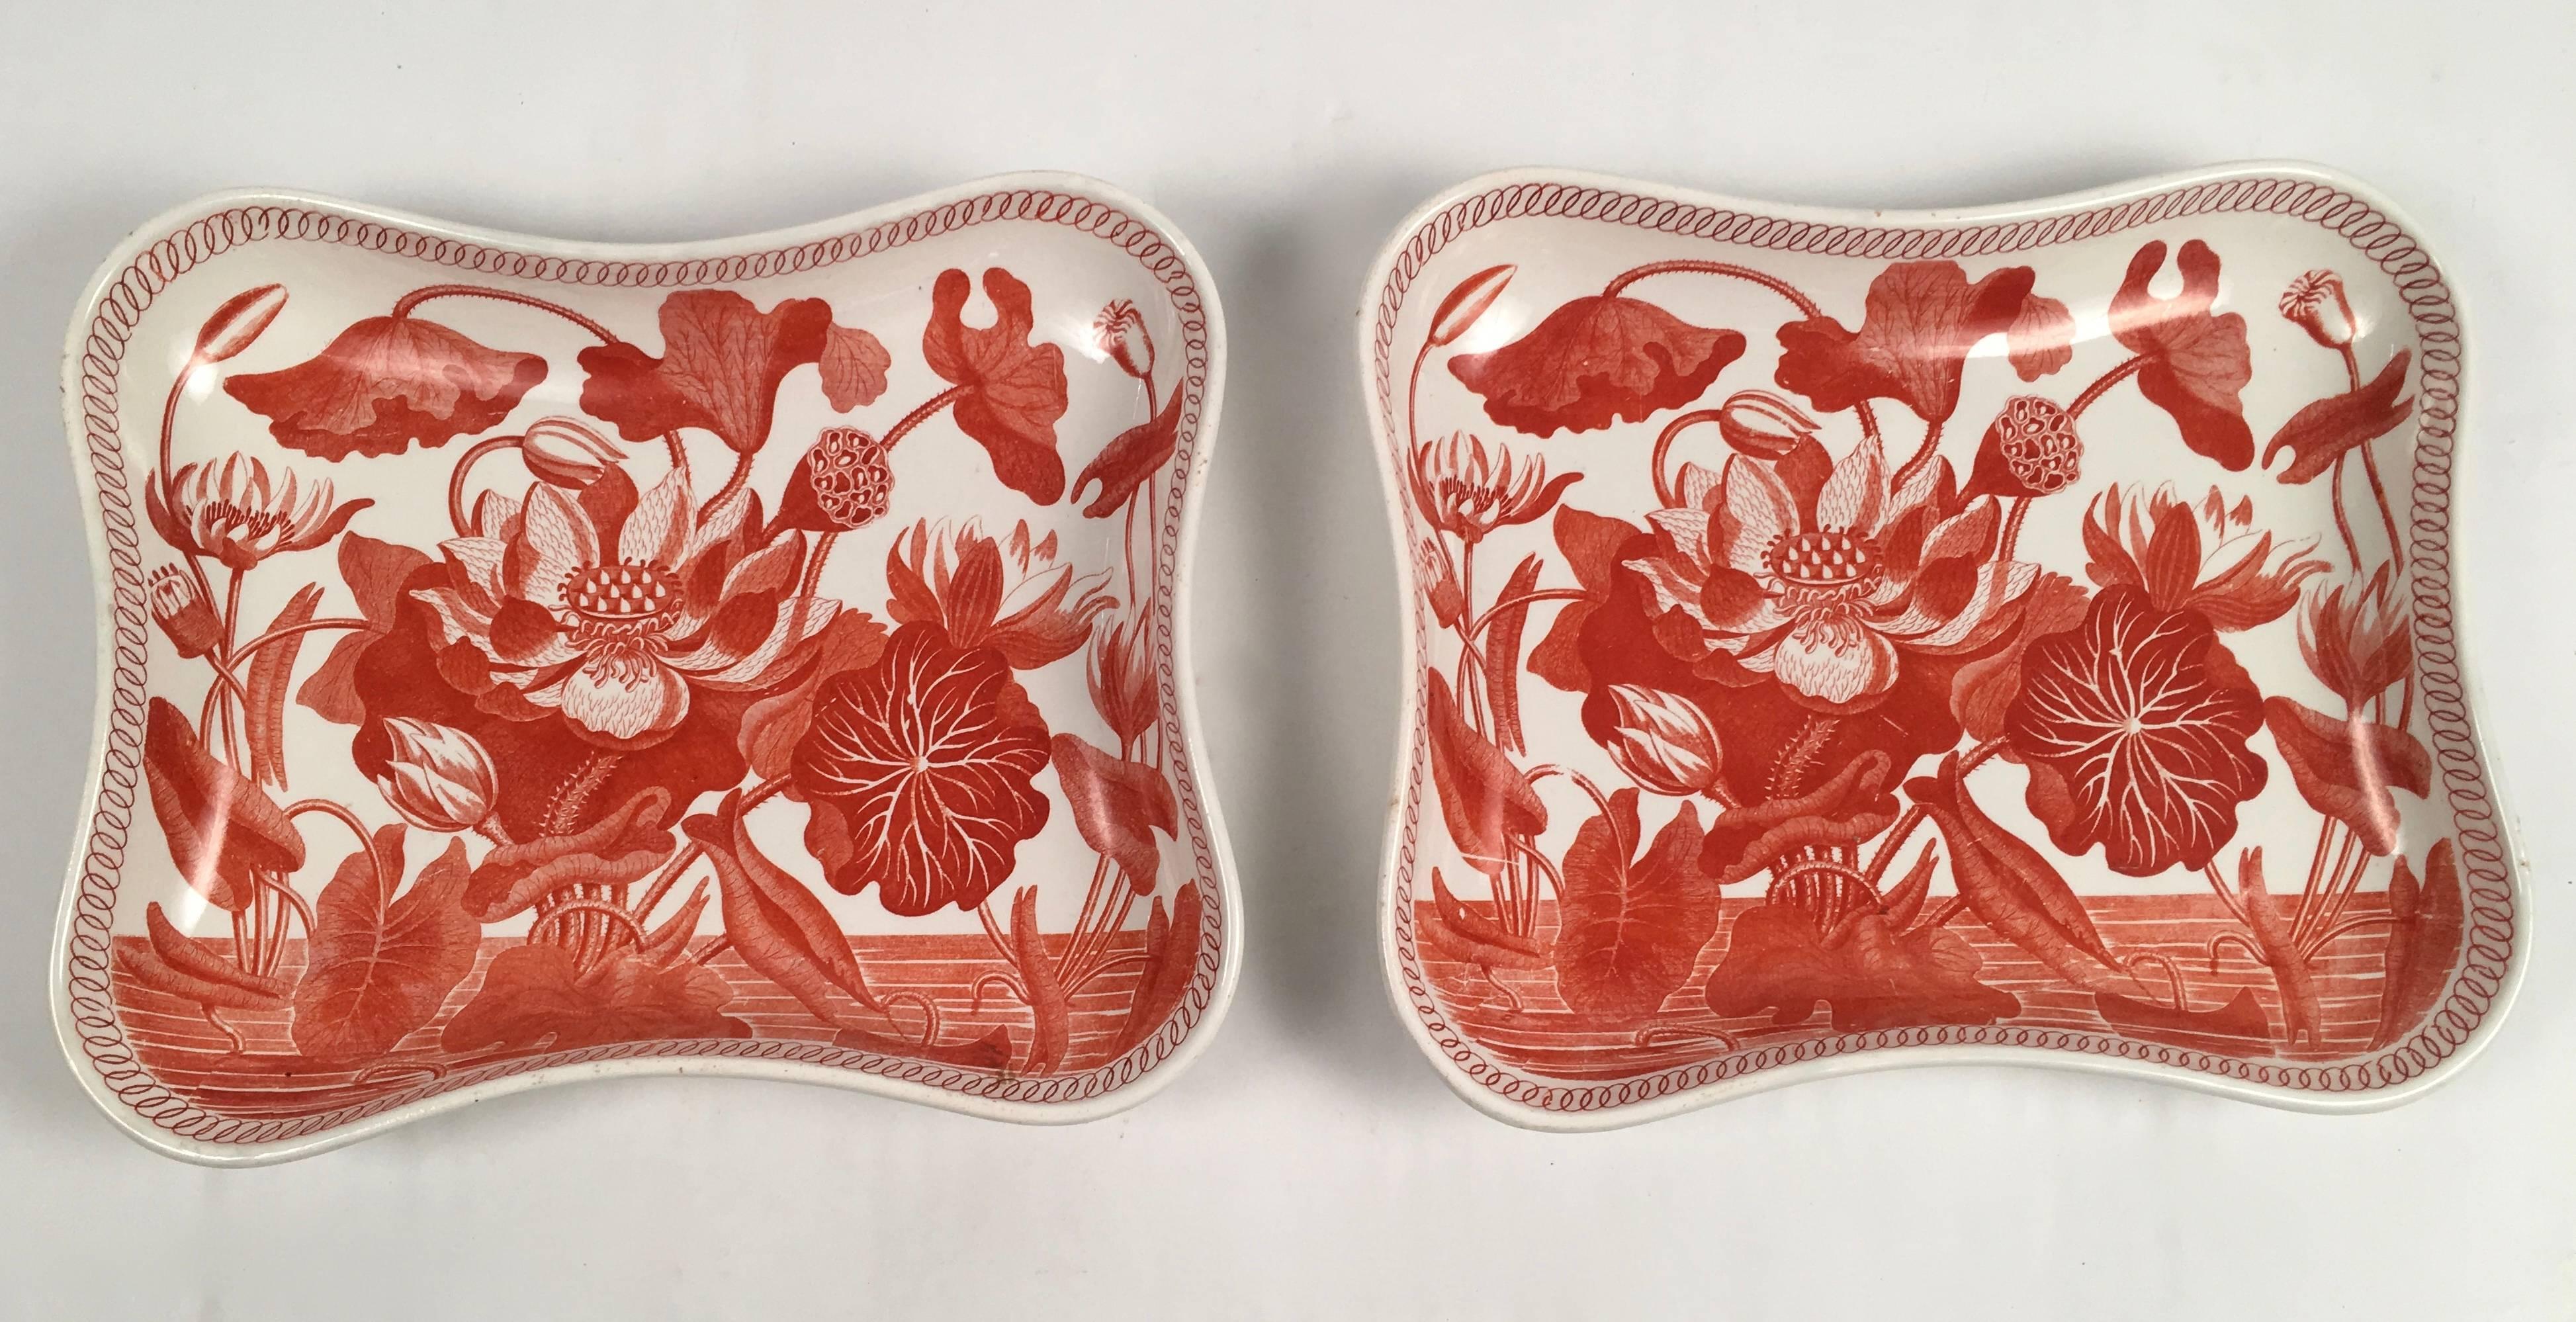 A rare pair of dessert dishes in the Water Lily pattern from the Darwin service, designed in 1806 and made only during a three year period, from 1808-1811 by Josiah Wedgwood and Sons, in earthenware, transfer printed in iron red with large, crisp